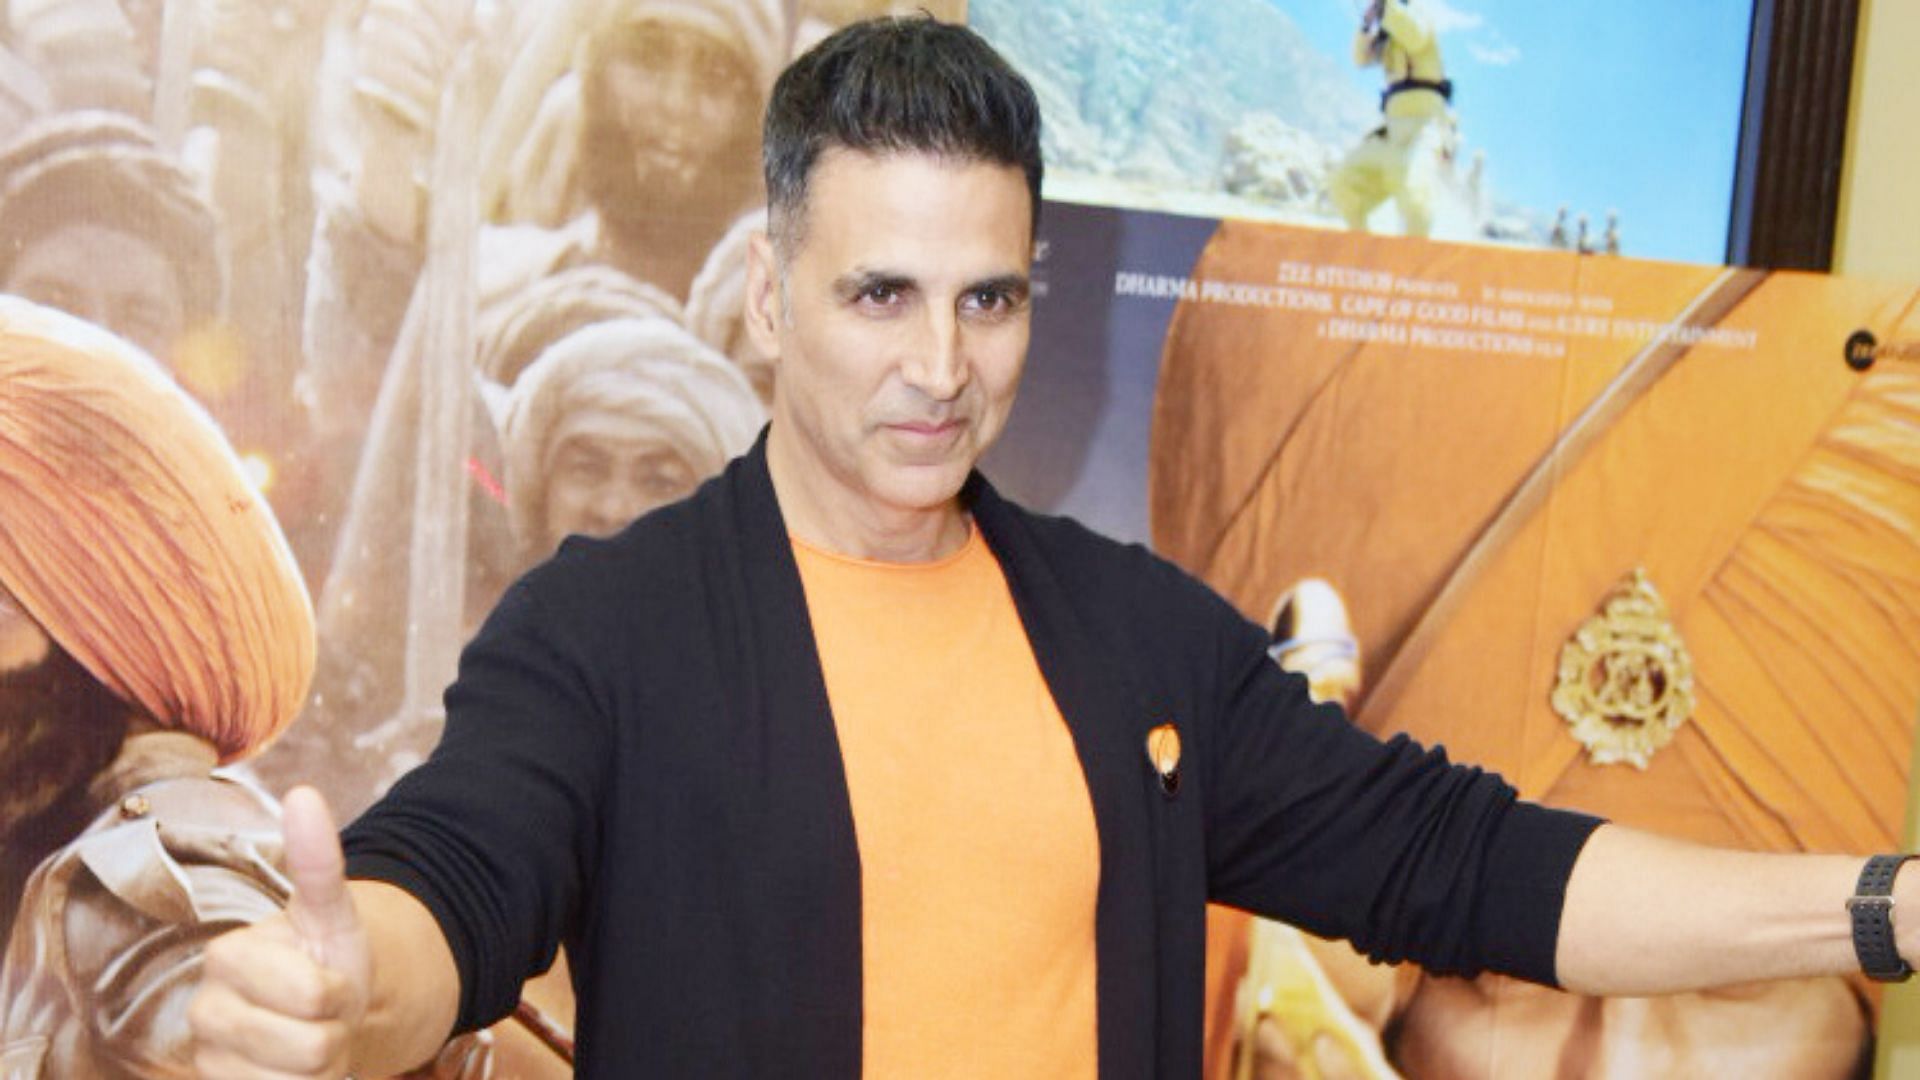 Akshay at a promotional event for his film in Mumbai.